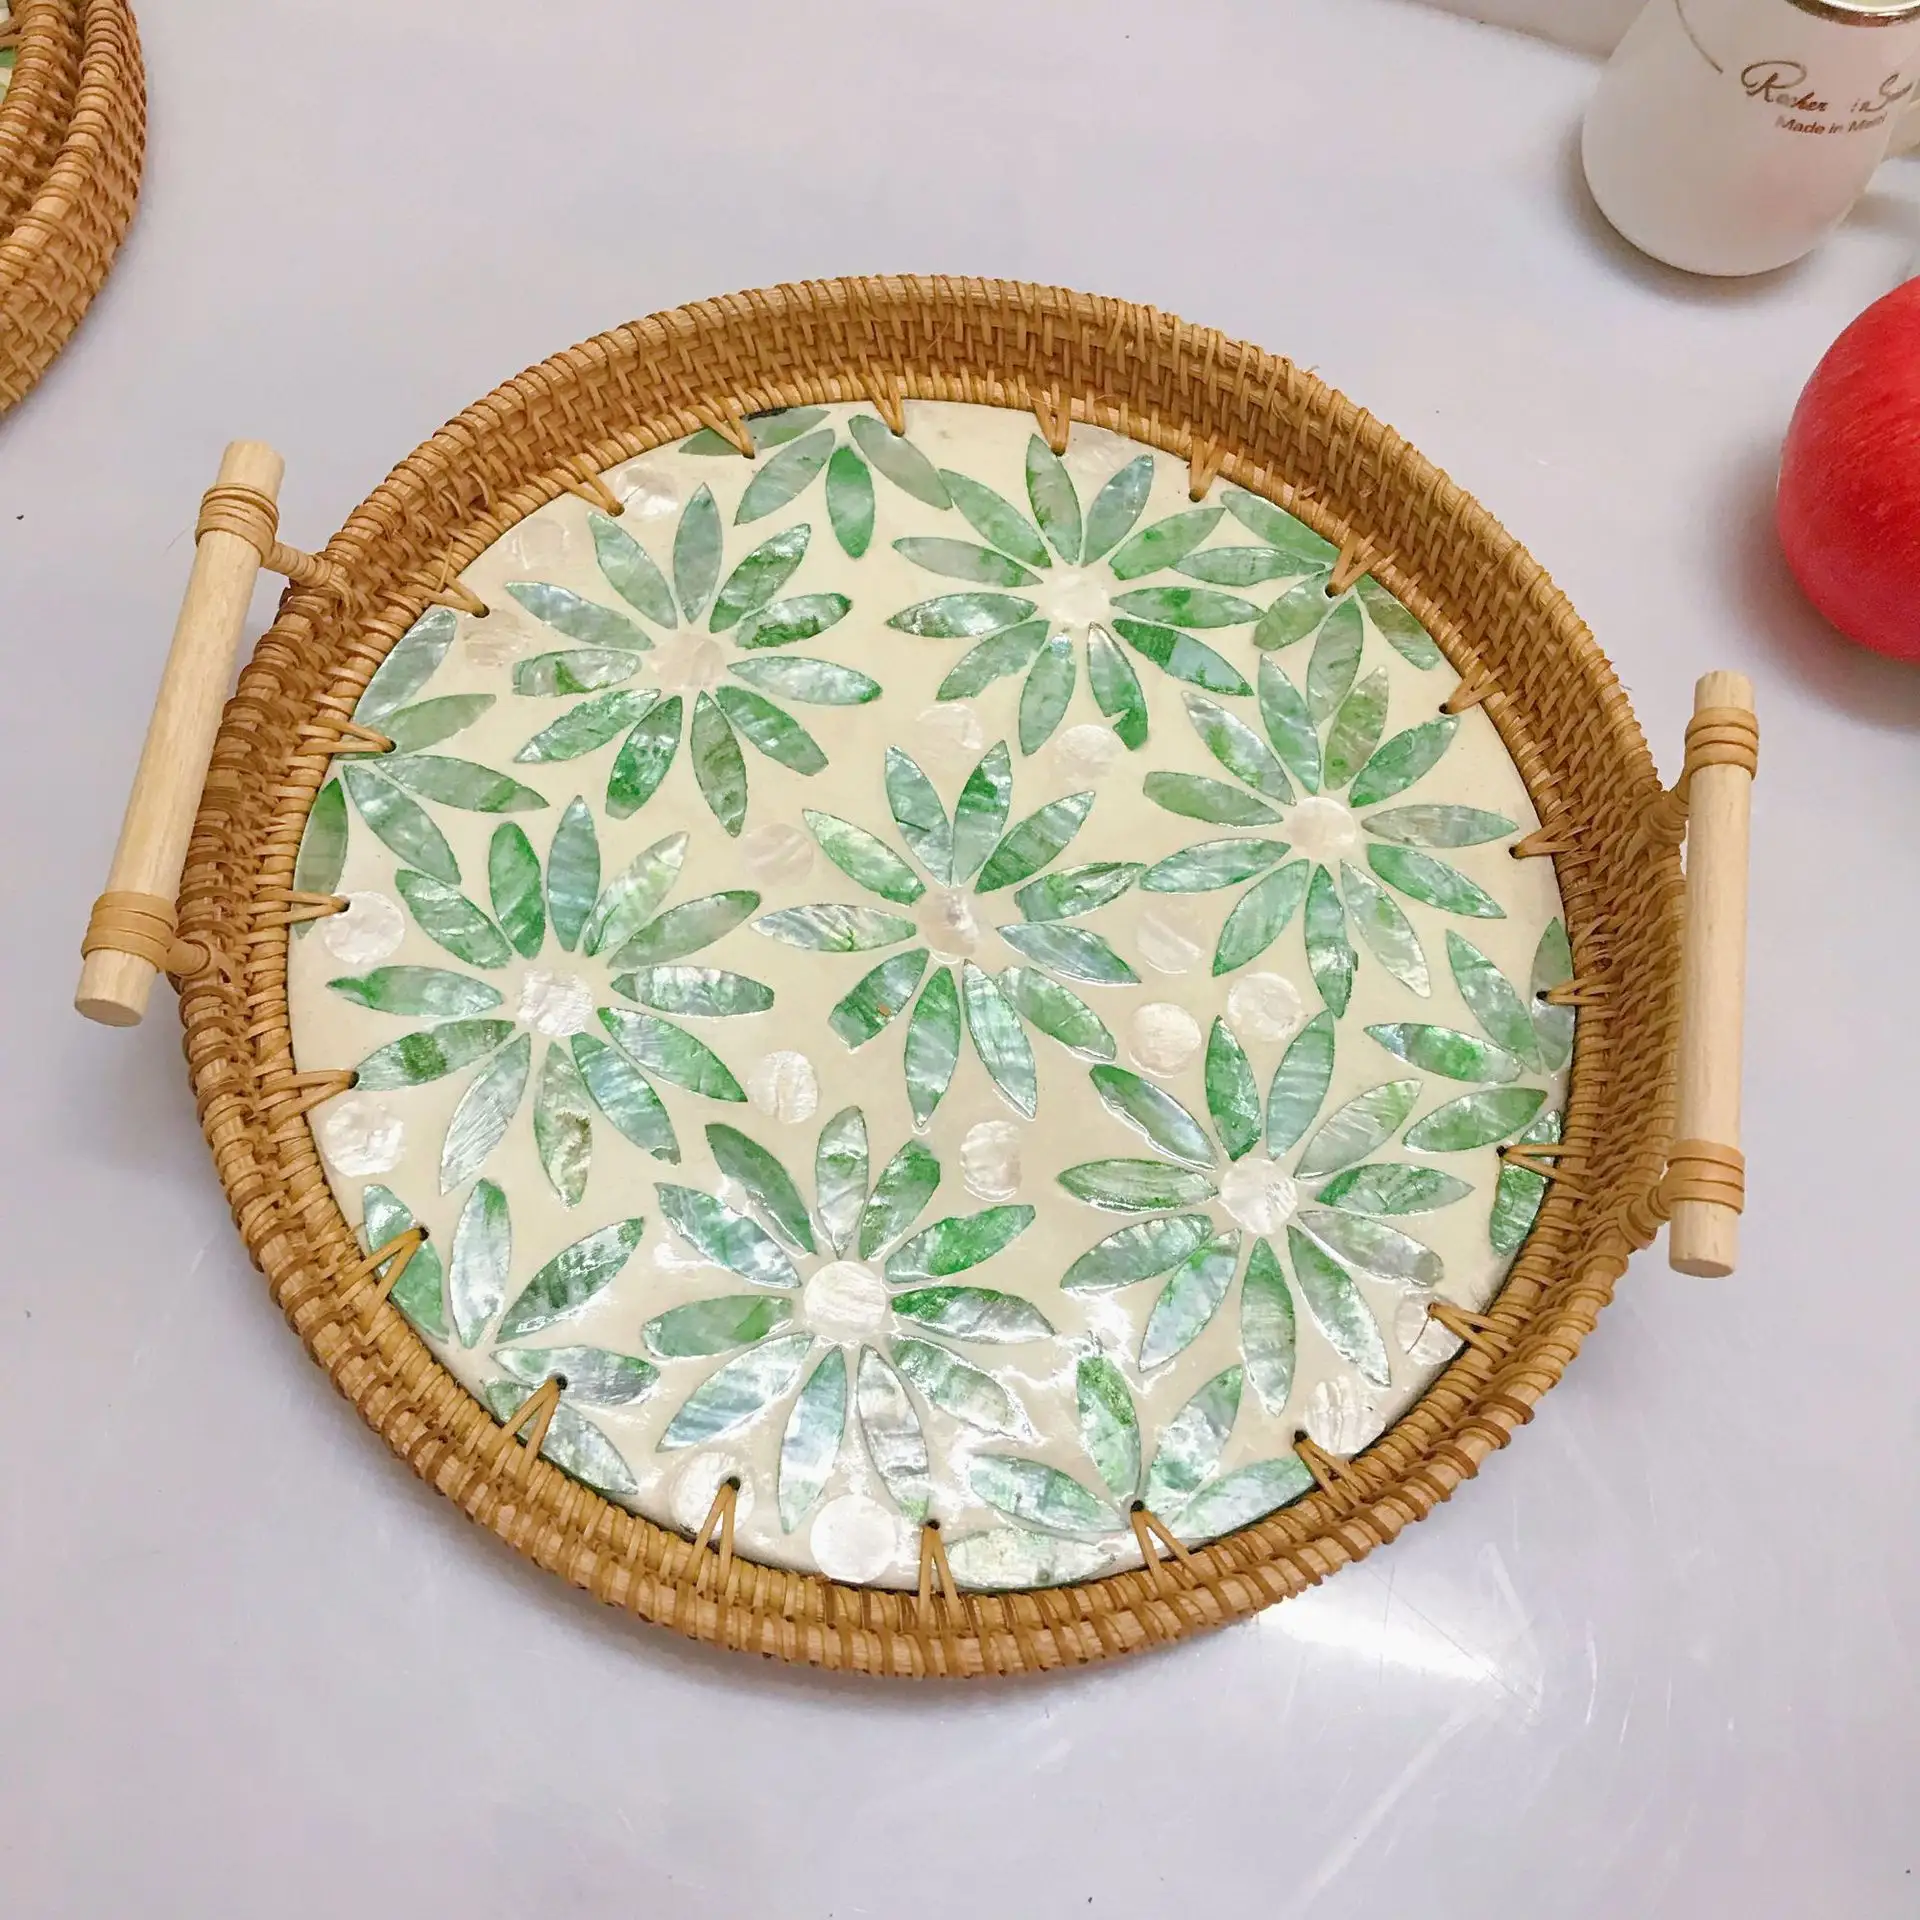 Unique woven rattan round serving tray handmade natural mother of pearl rattan tray